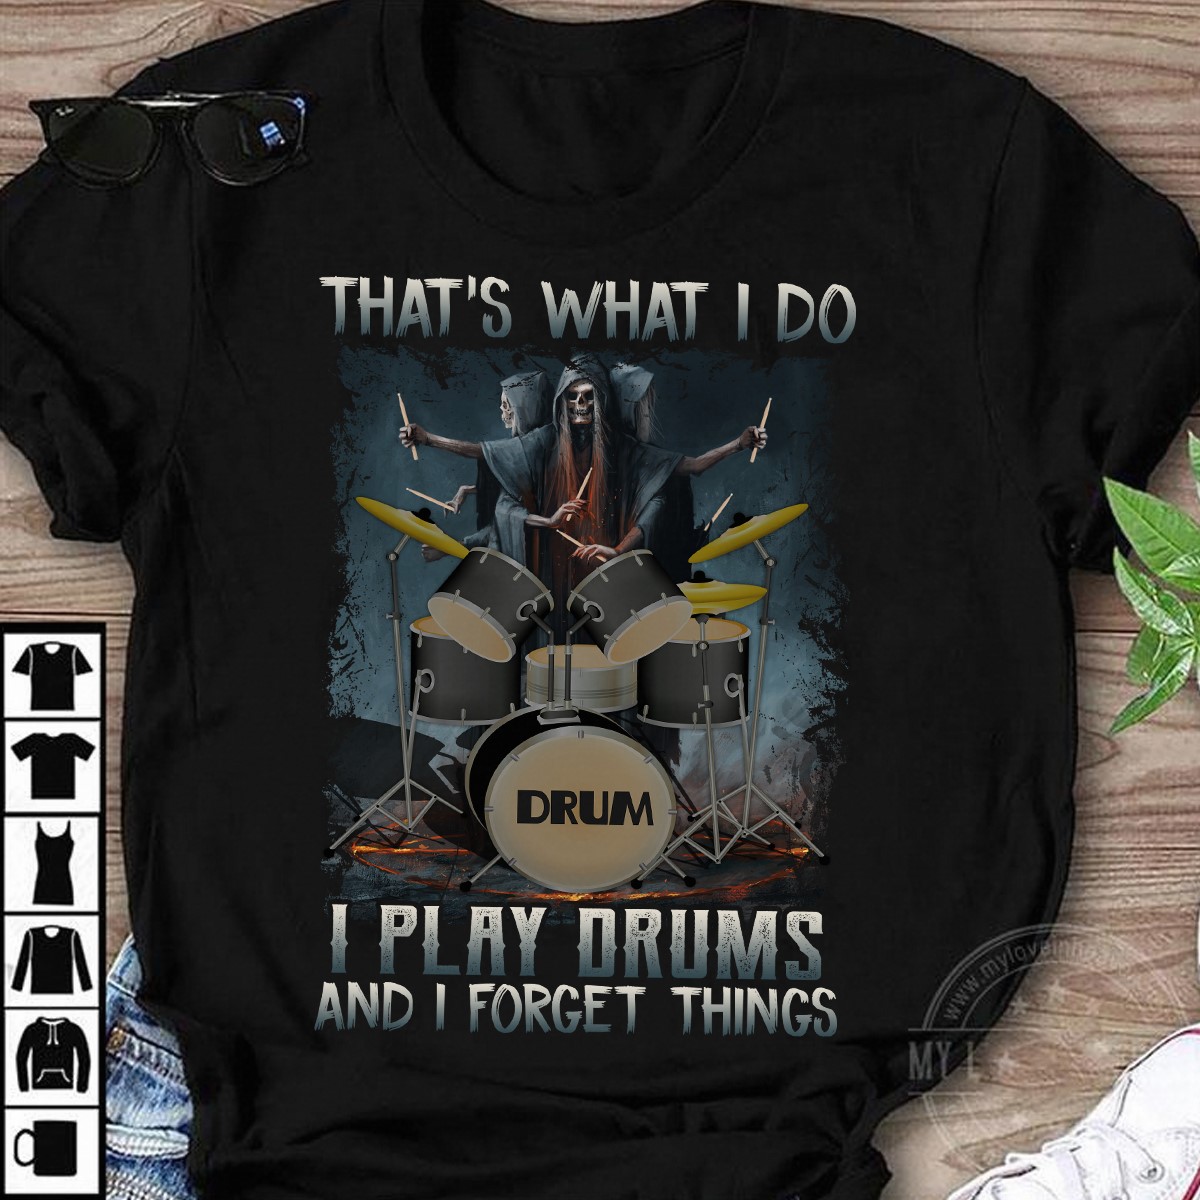 That's what I do I play drums and I forget things - Evil playing drum